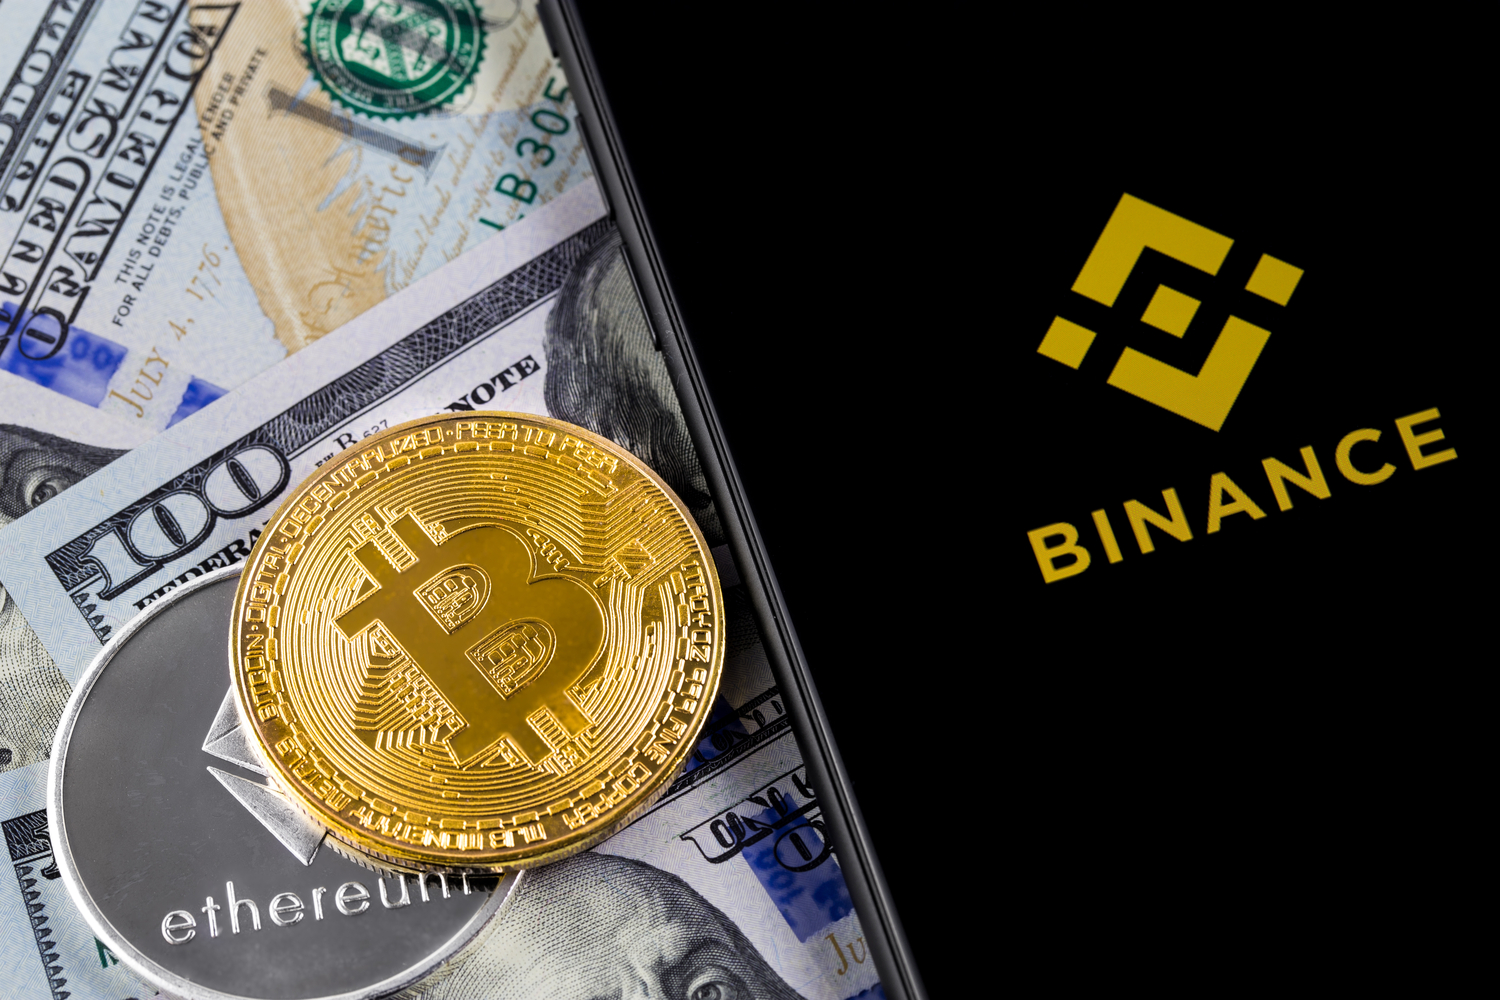 Binance's BNB Token Hits All-Time High in Bitcoin Value - CoinDesk